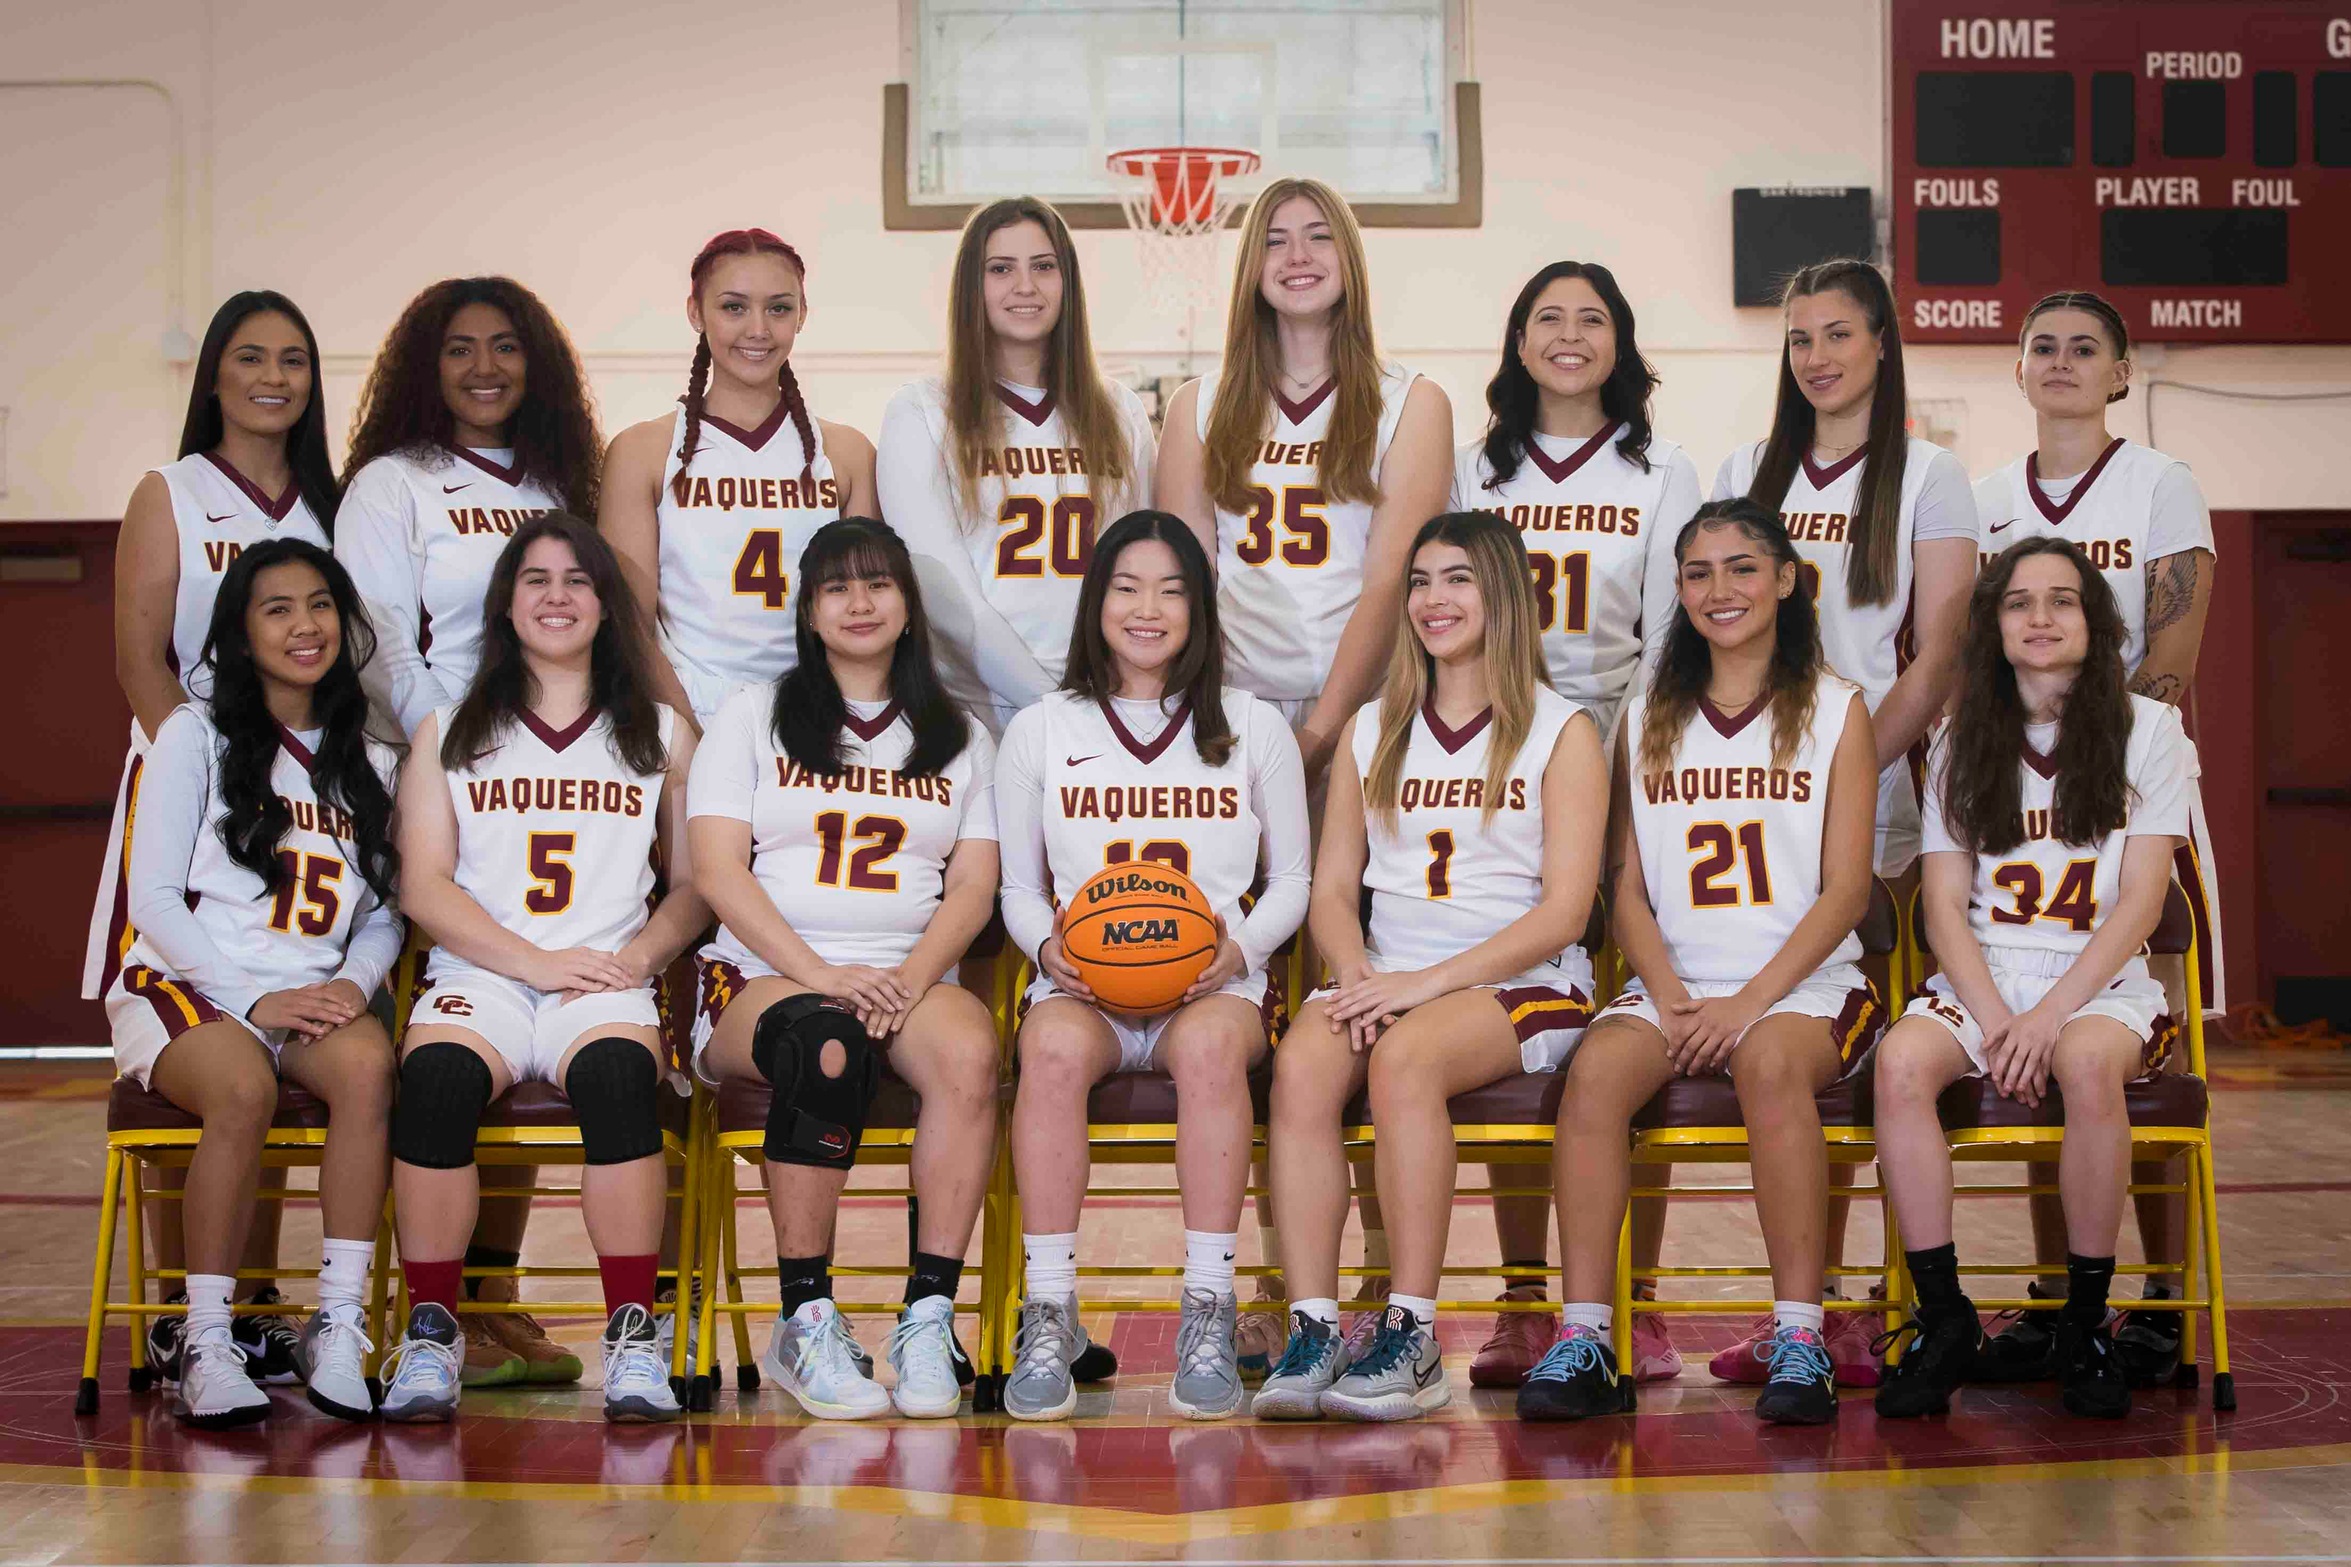 GCC Women's Basketball wins 4th straight WSC South Title with 81-64 win over Antelope Valley College Feb. 17; hosts Southern California Regional playoff game Feb. 25